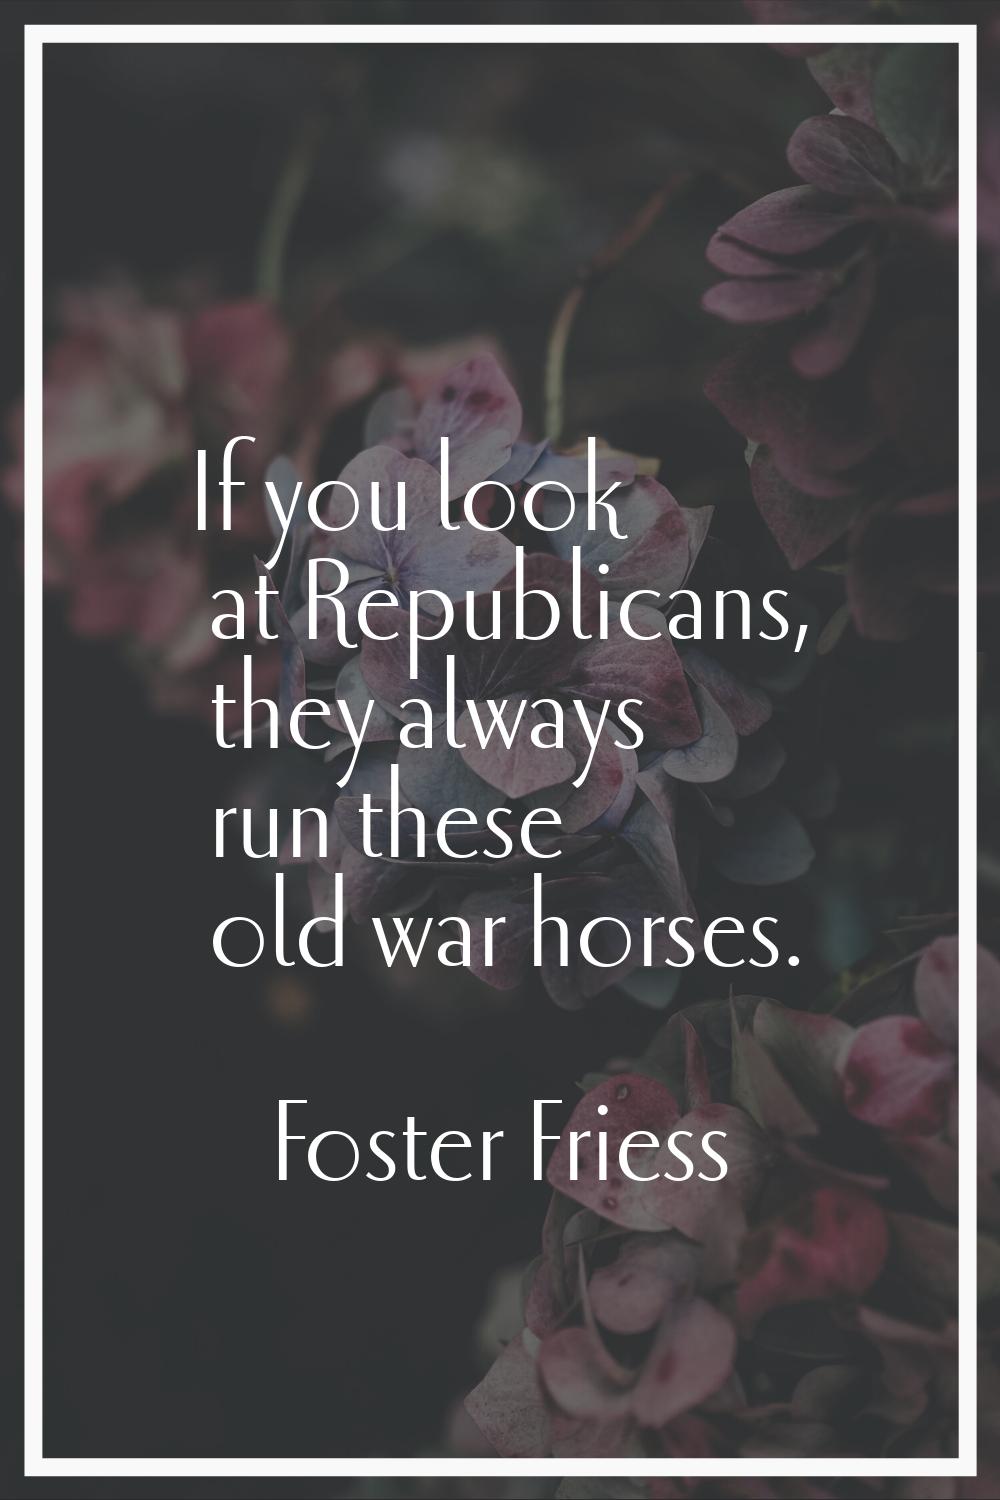 If you look at Republicans, they always run these old war horses.